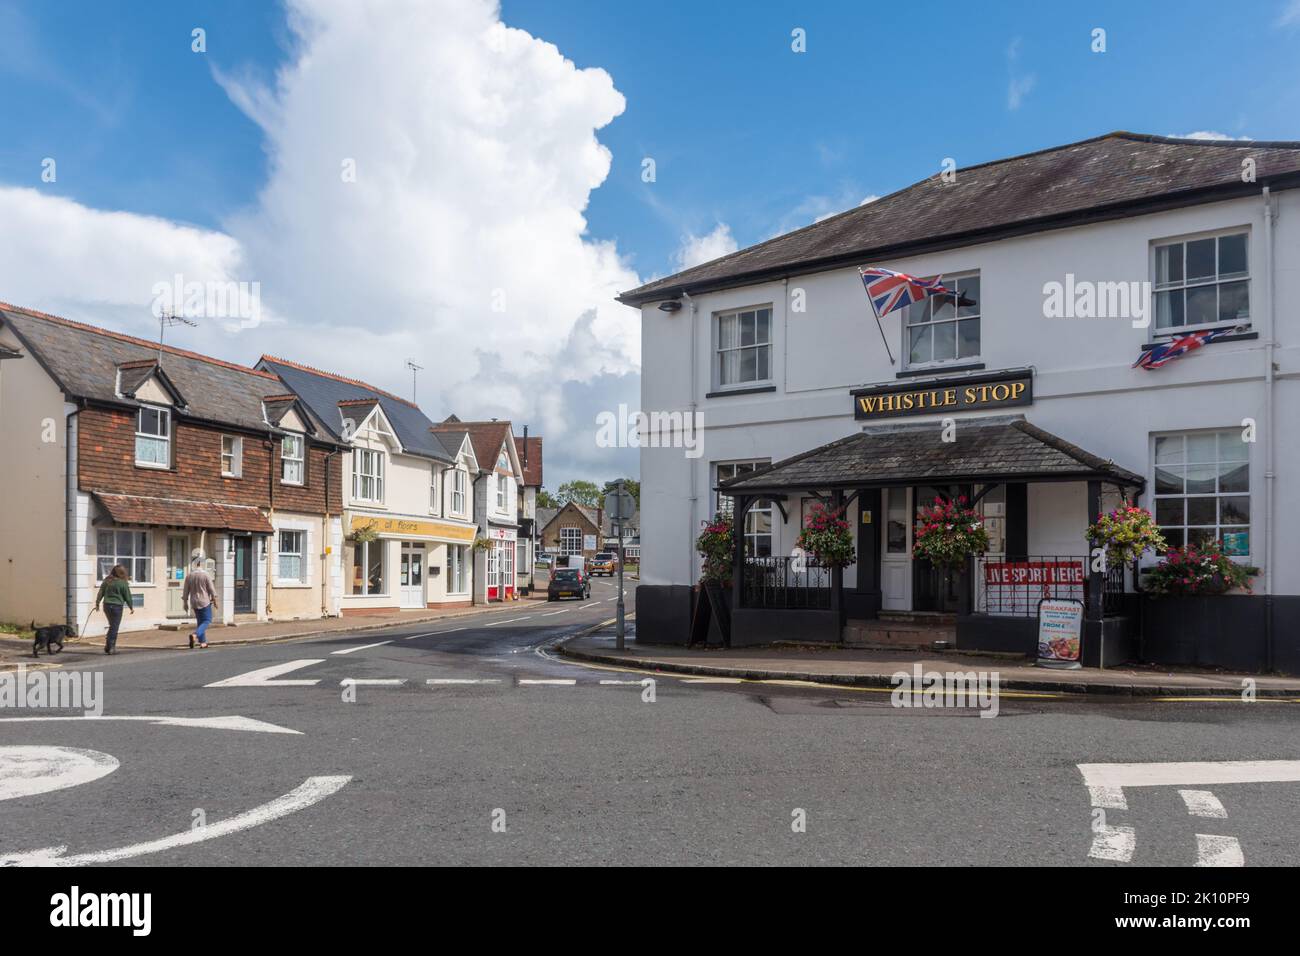 Whistle Stop pub in Liss village centre, East Hampshire, England, UK Stock Photo